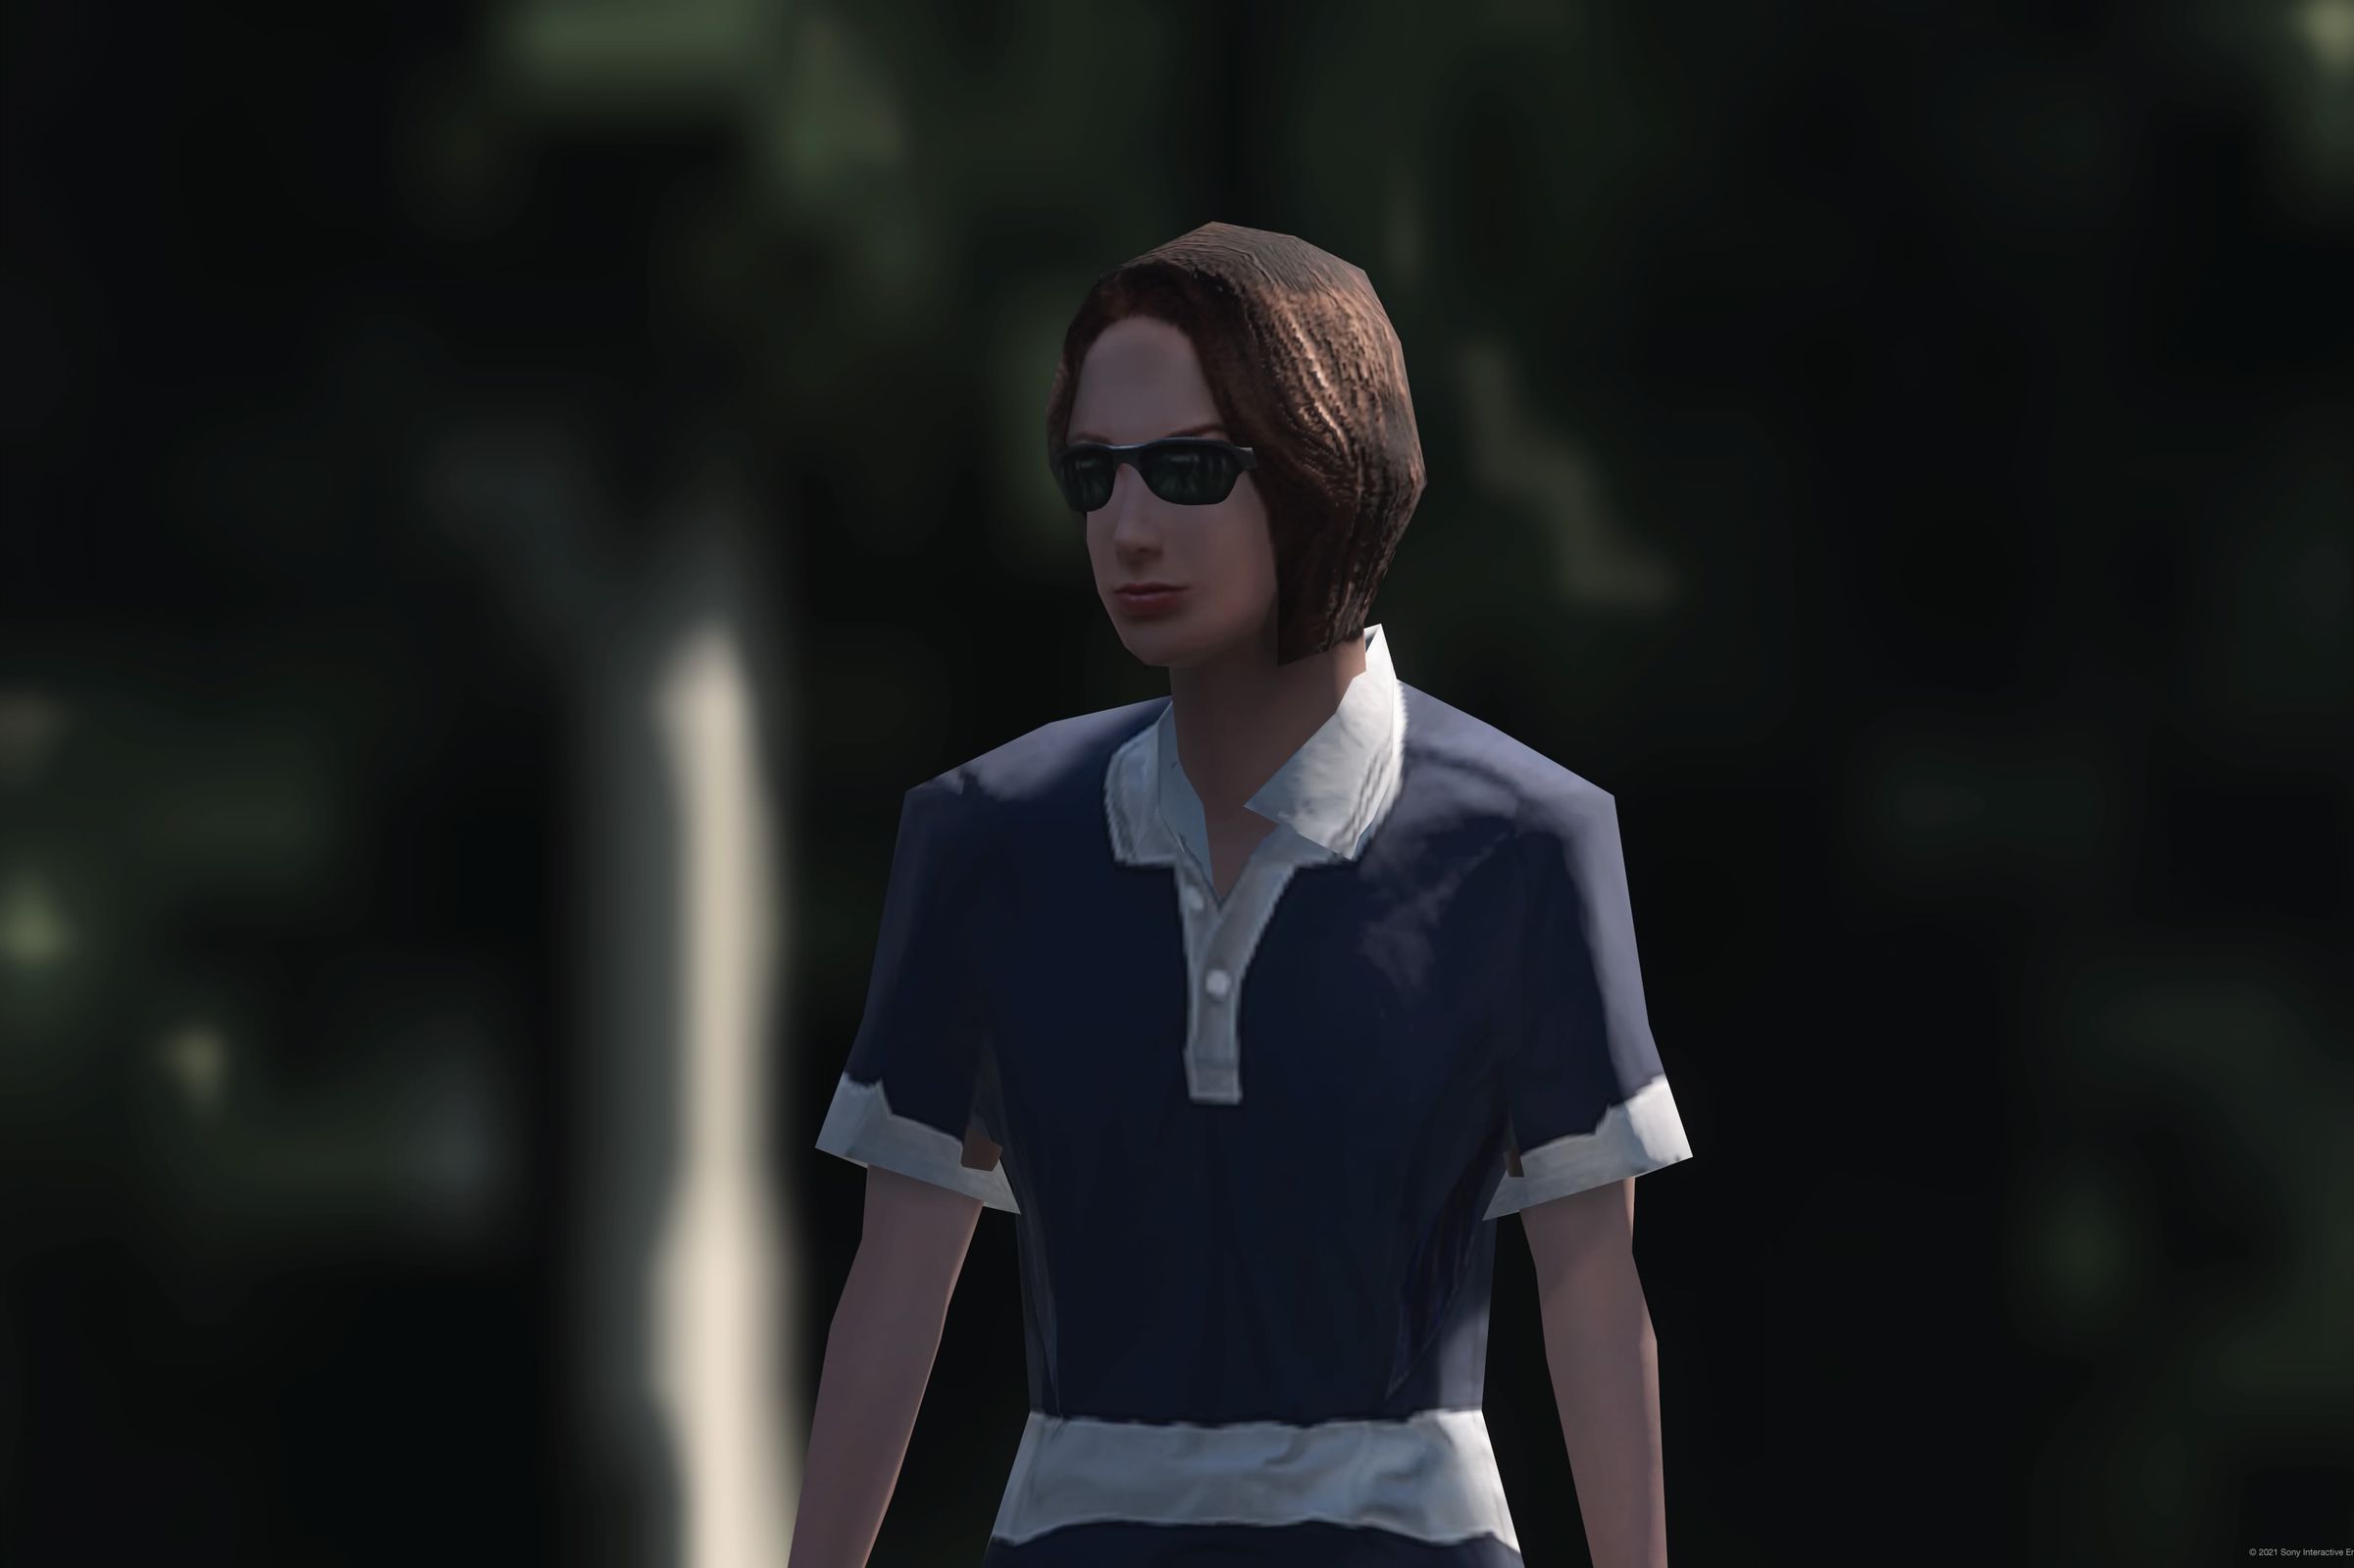 <em>“I may be a carbon copy of the other character models, but I’m rocking sunglasses and a cool polo t-shirt. Therefore, I am unique.”</em>